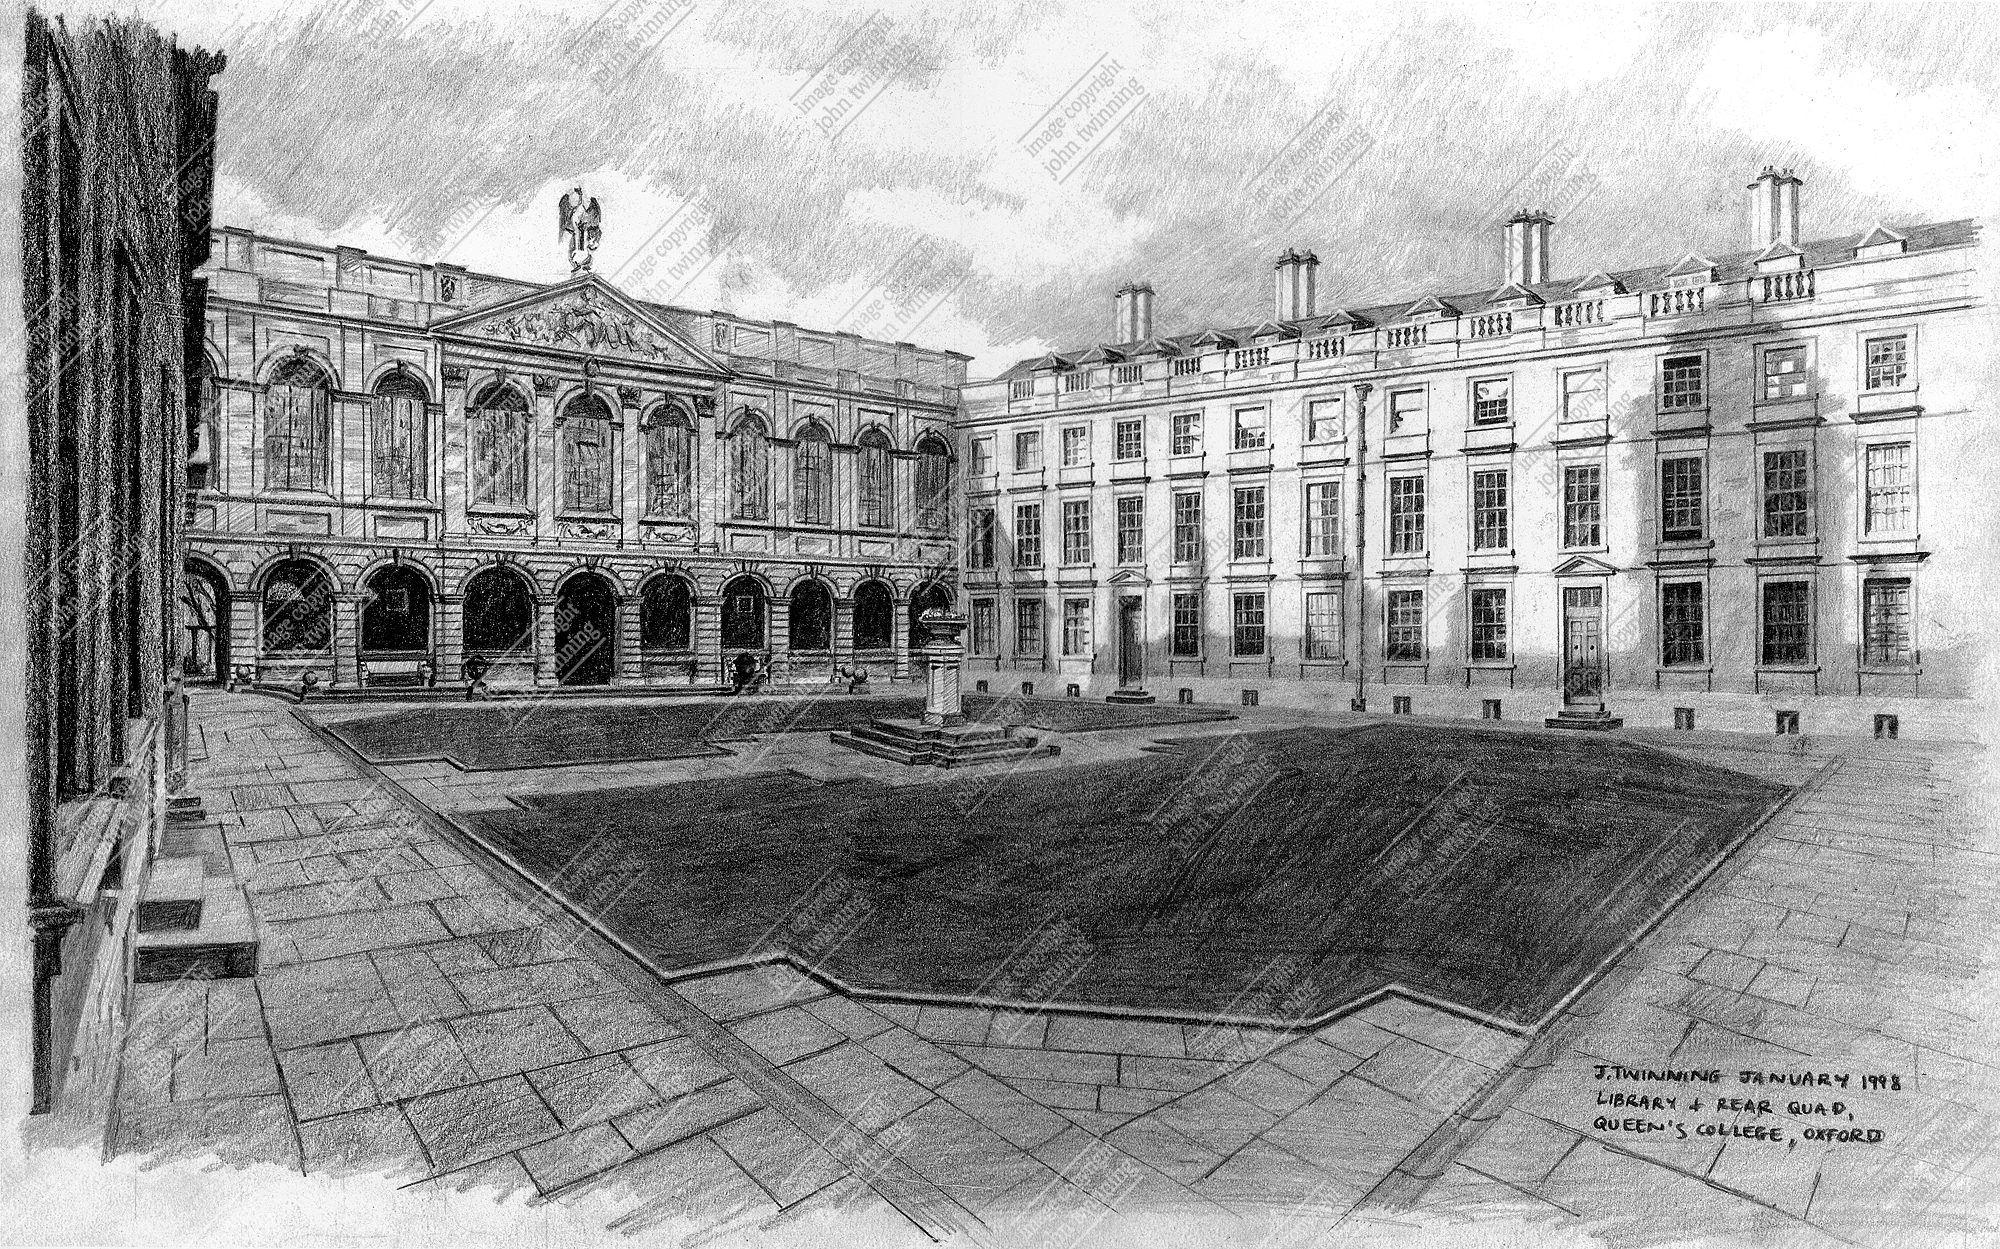 'The Back Quad' - art print from a pencil drawing of this view within the grounds of the queen's college, oxford